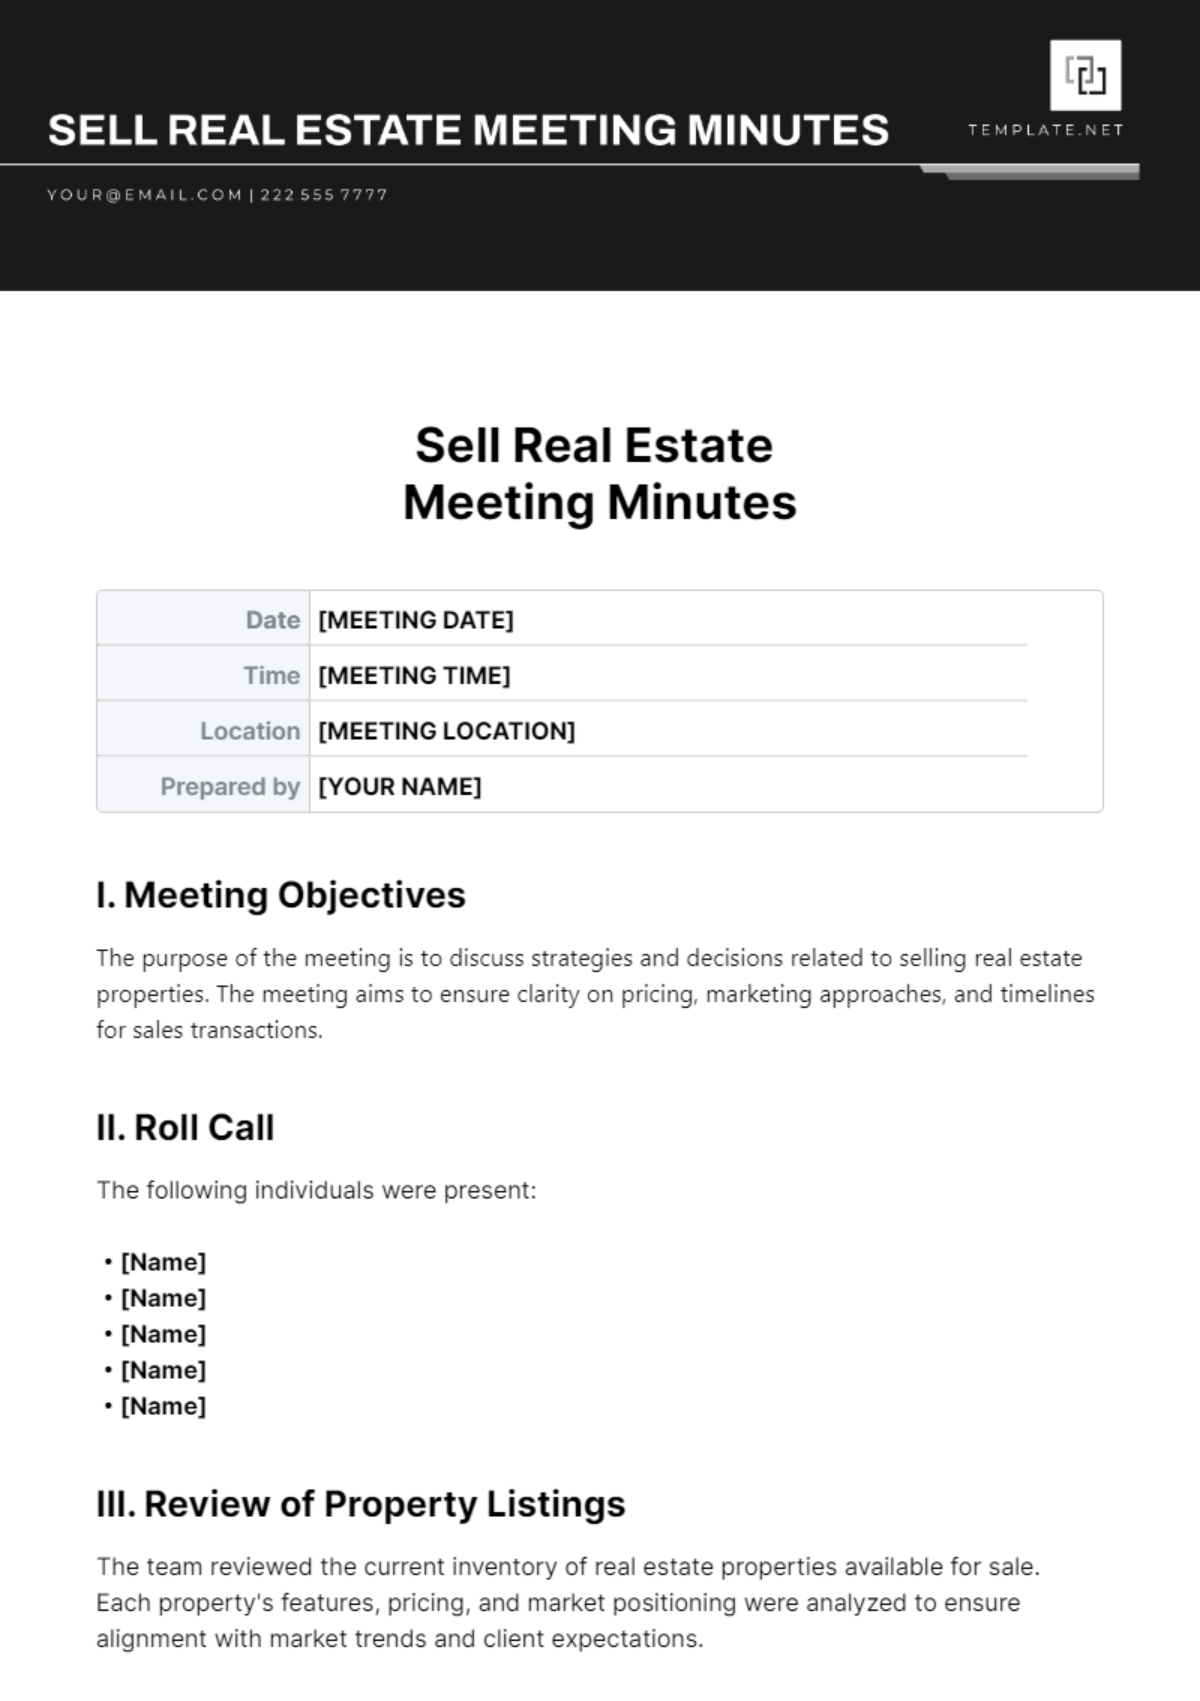 Sell Real Estate Meeting Minutes Template